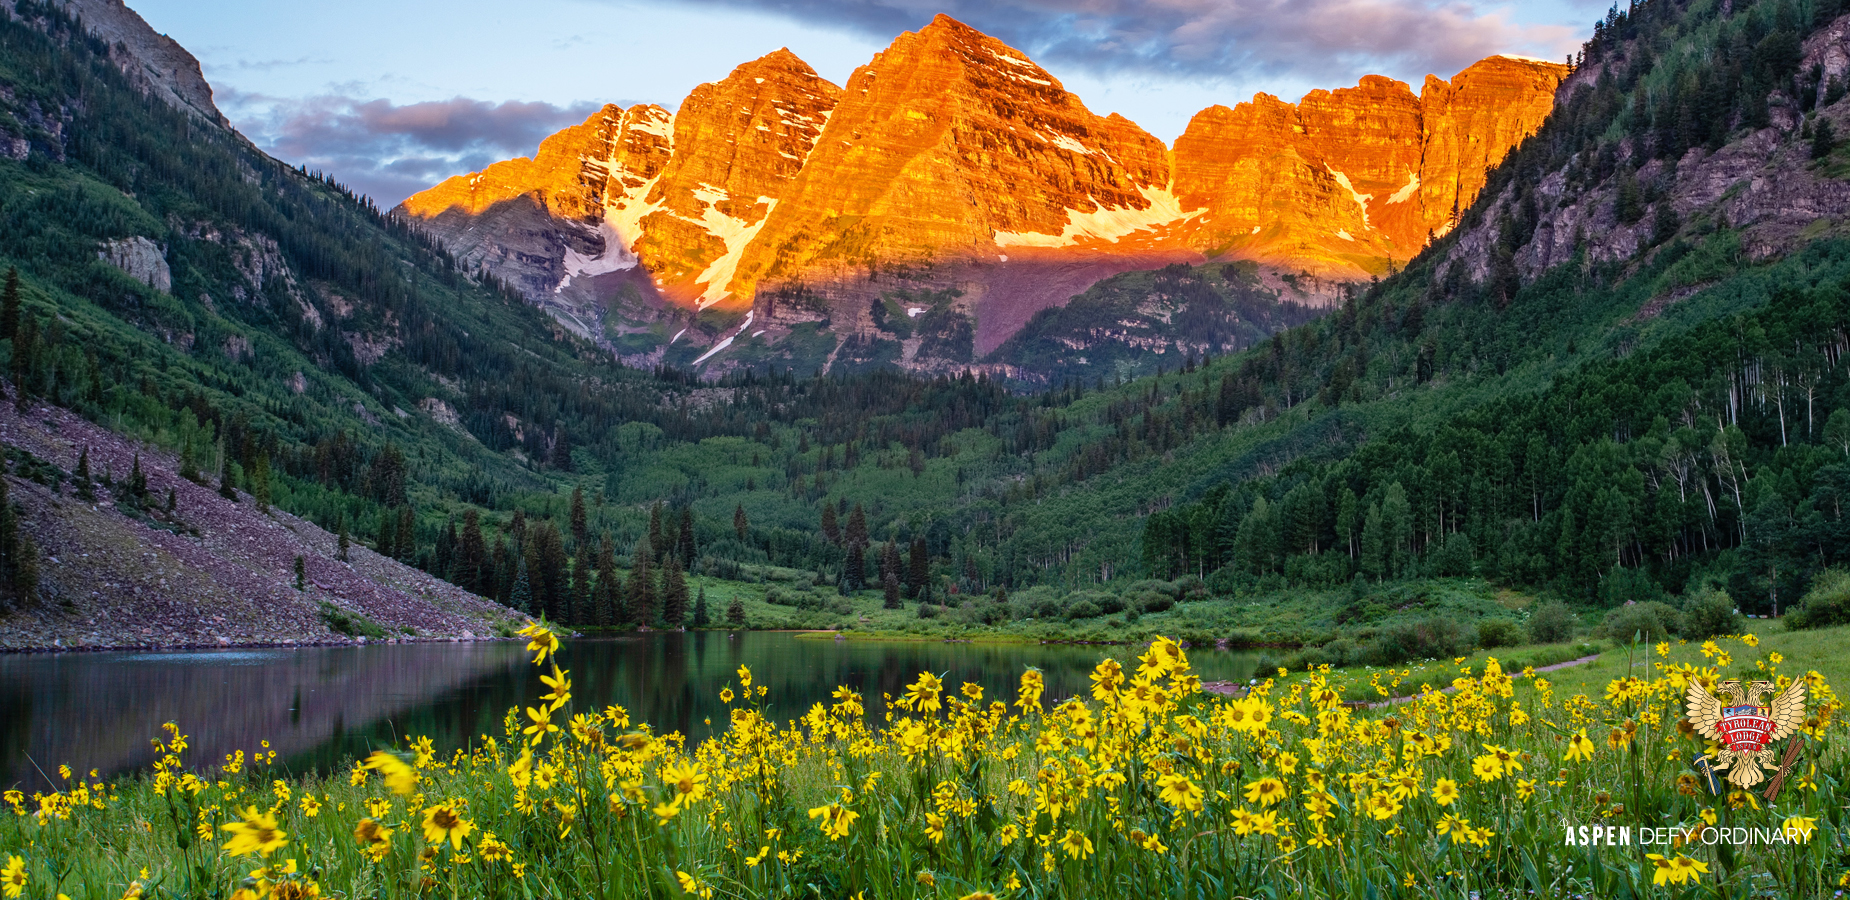 Sunset at Maroon Bells in spring is magic